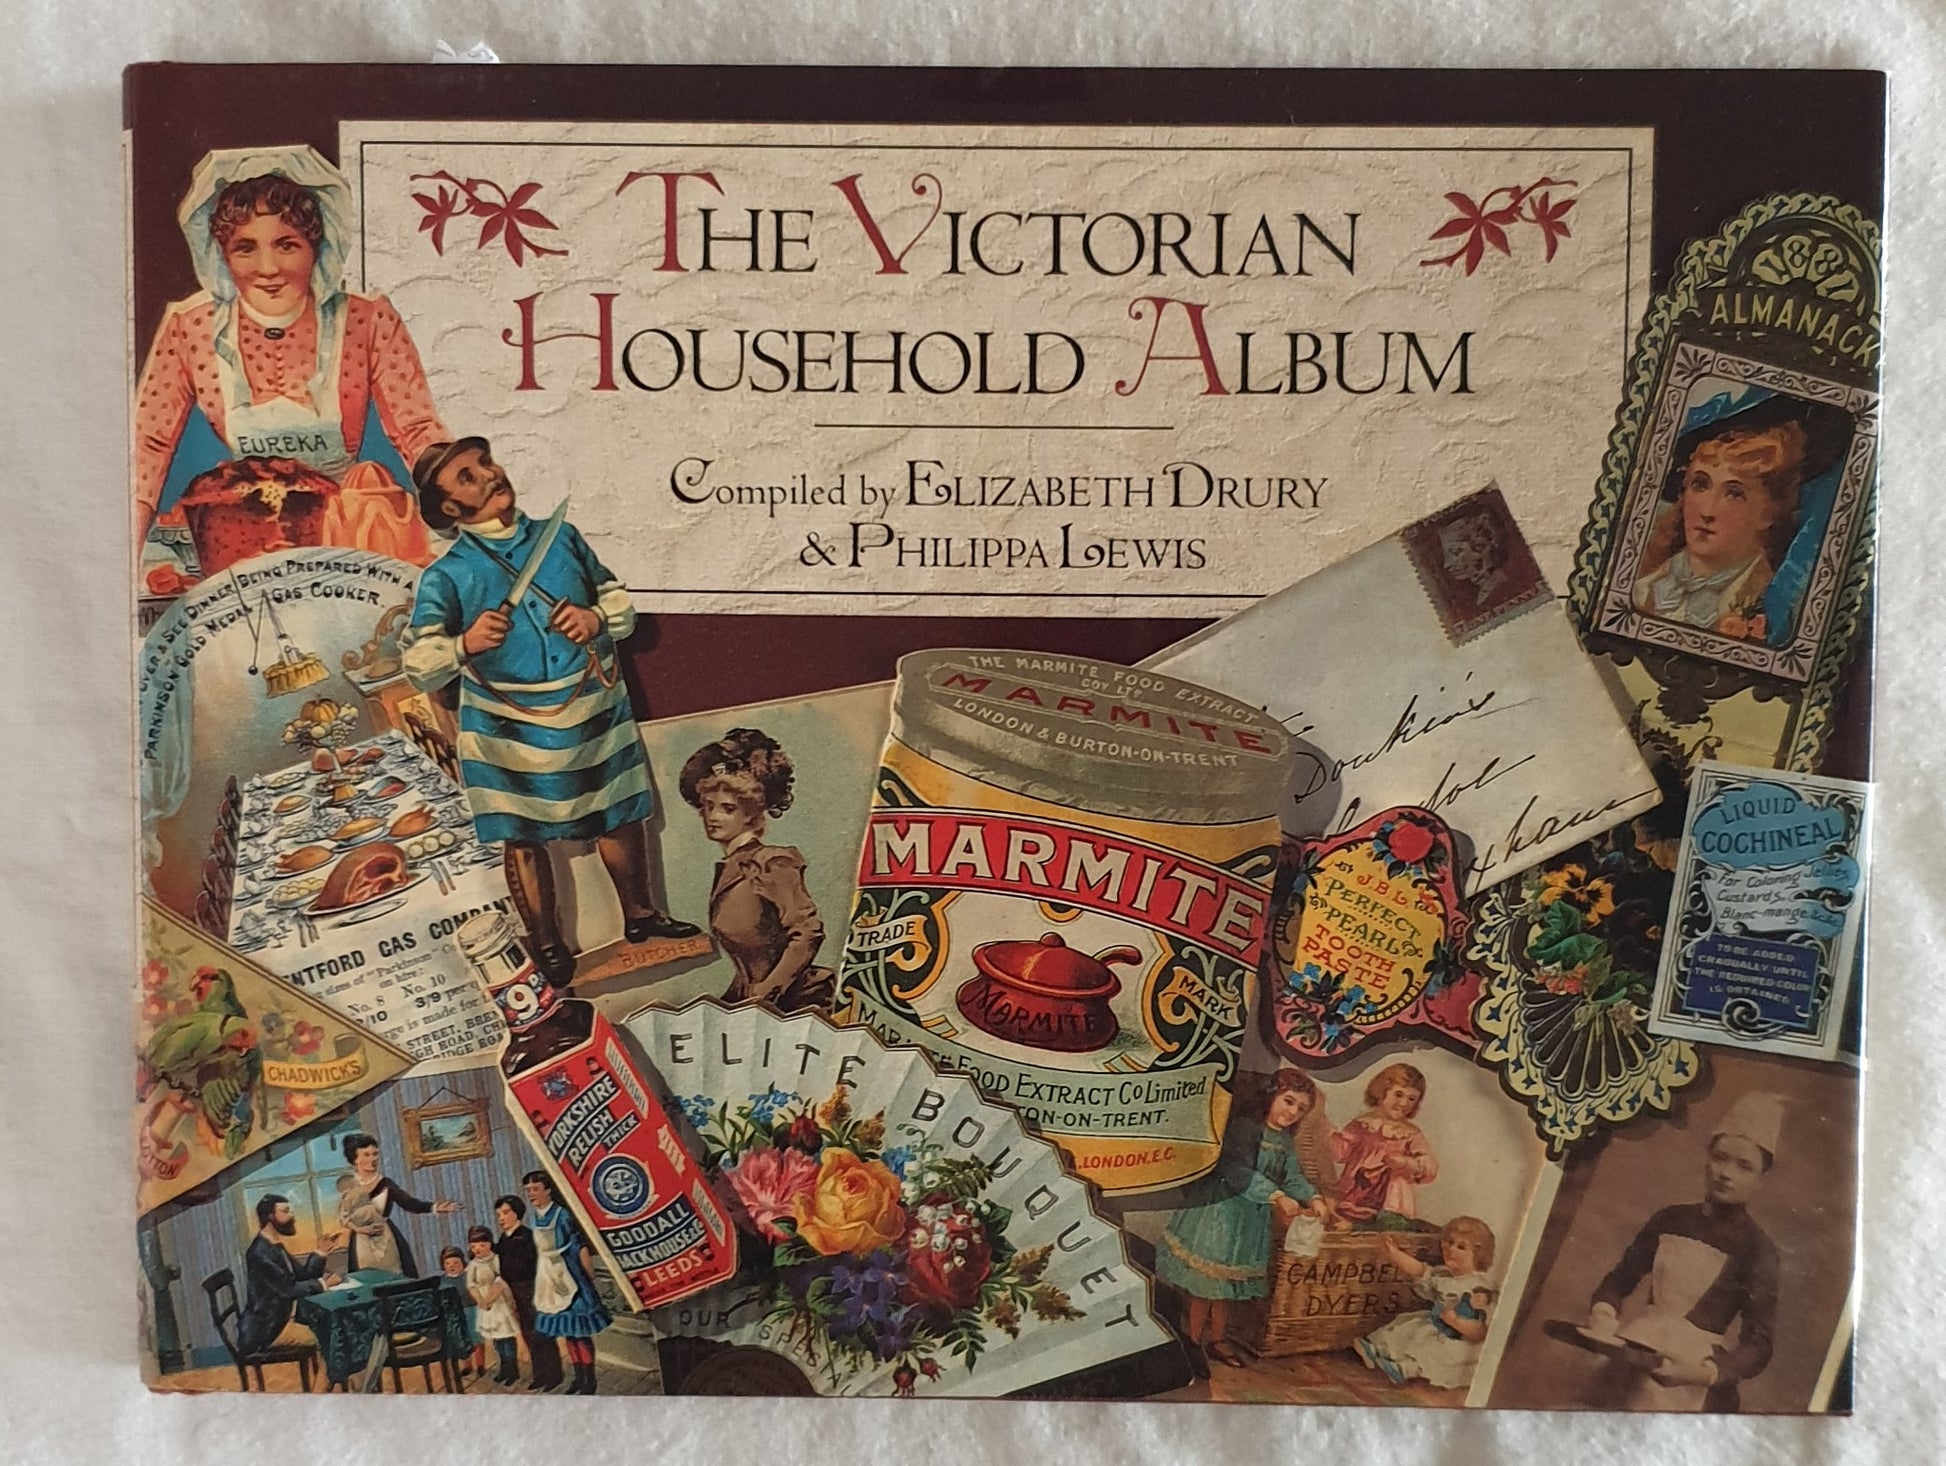 The Victorian Household Album by Elizabeth Drury and Philippa Lewis